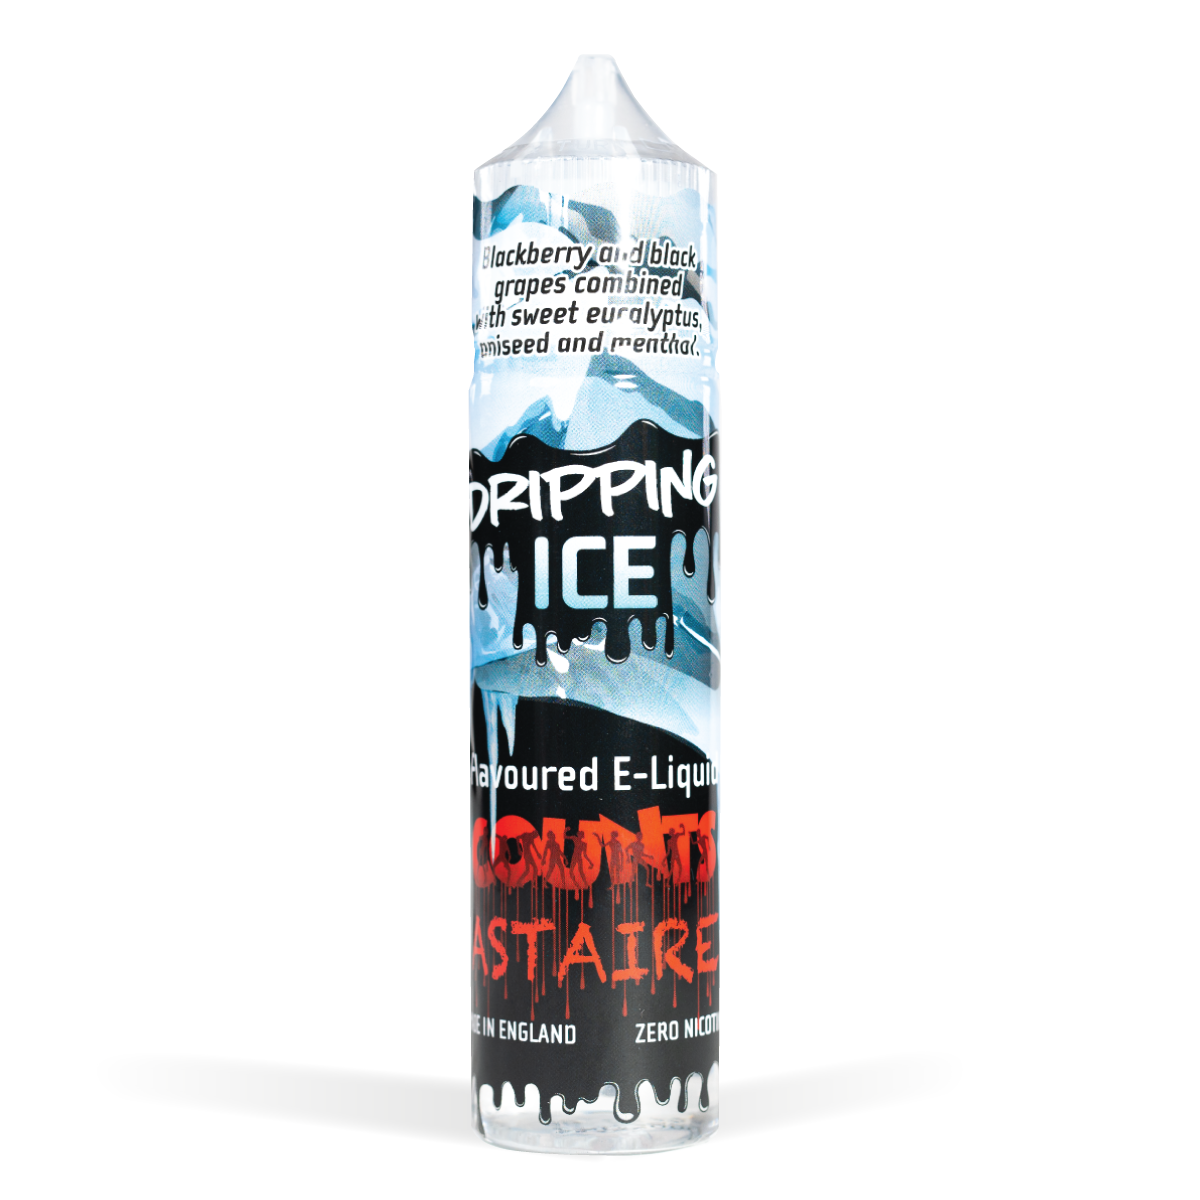 Eco vape Dripping range Counts Astaire Flavour 50ml Shortfill